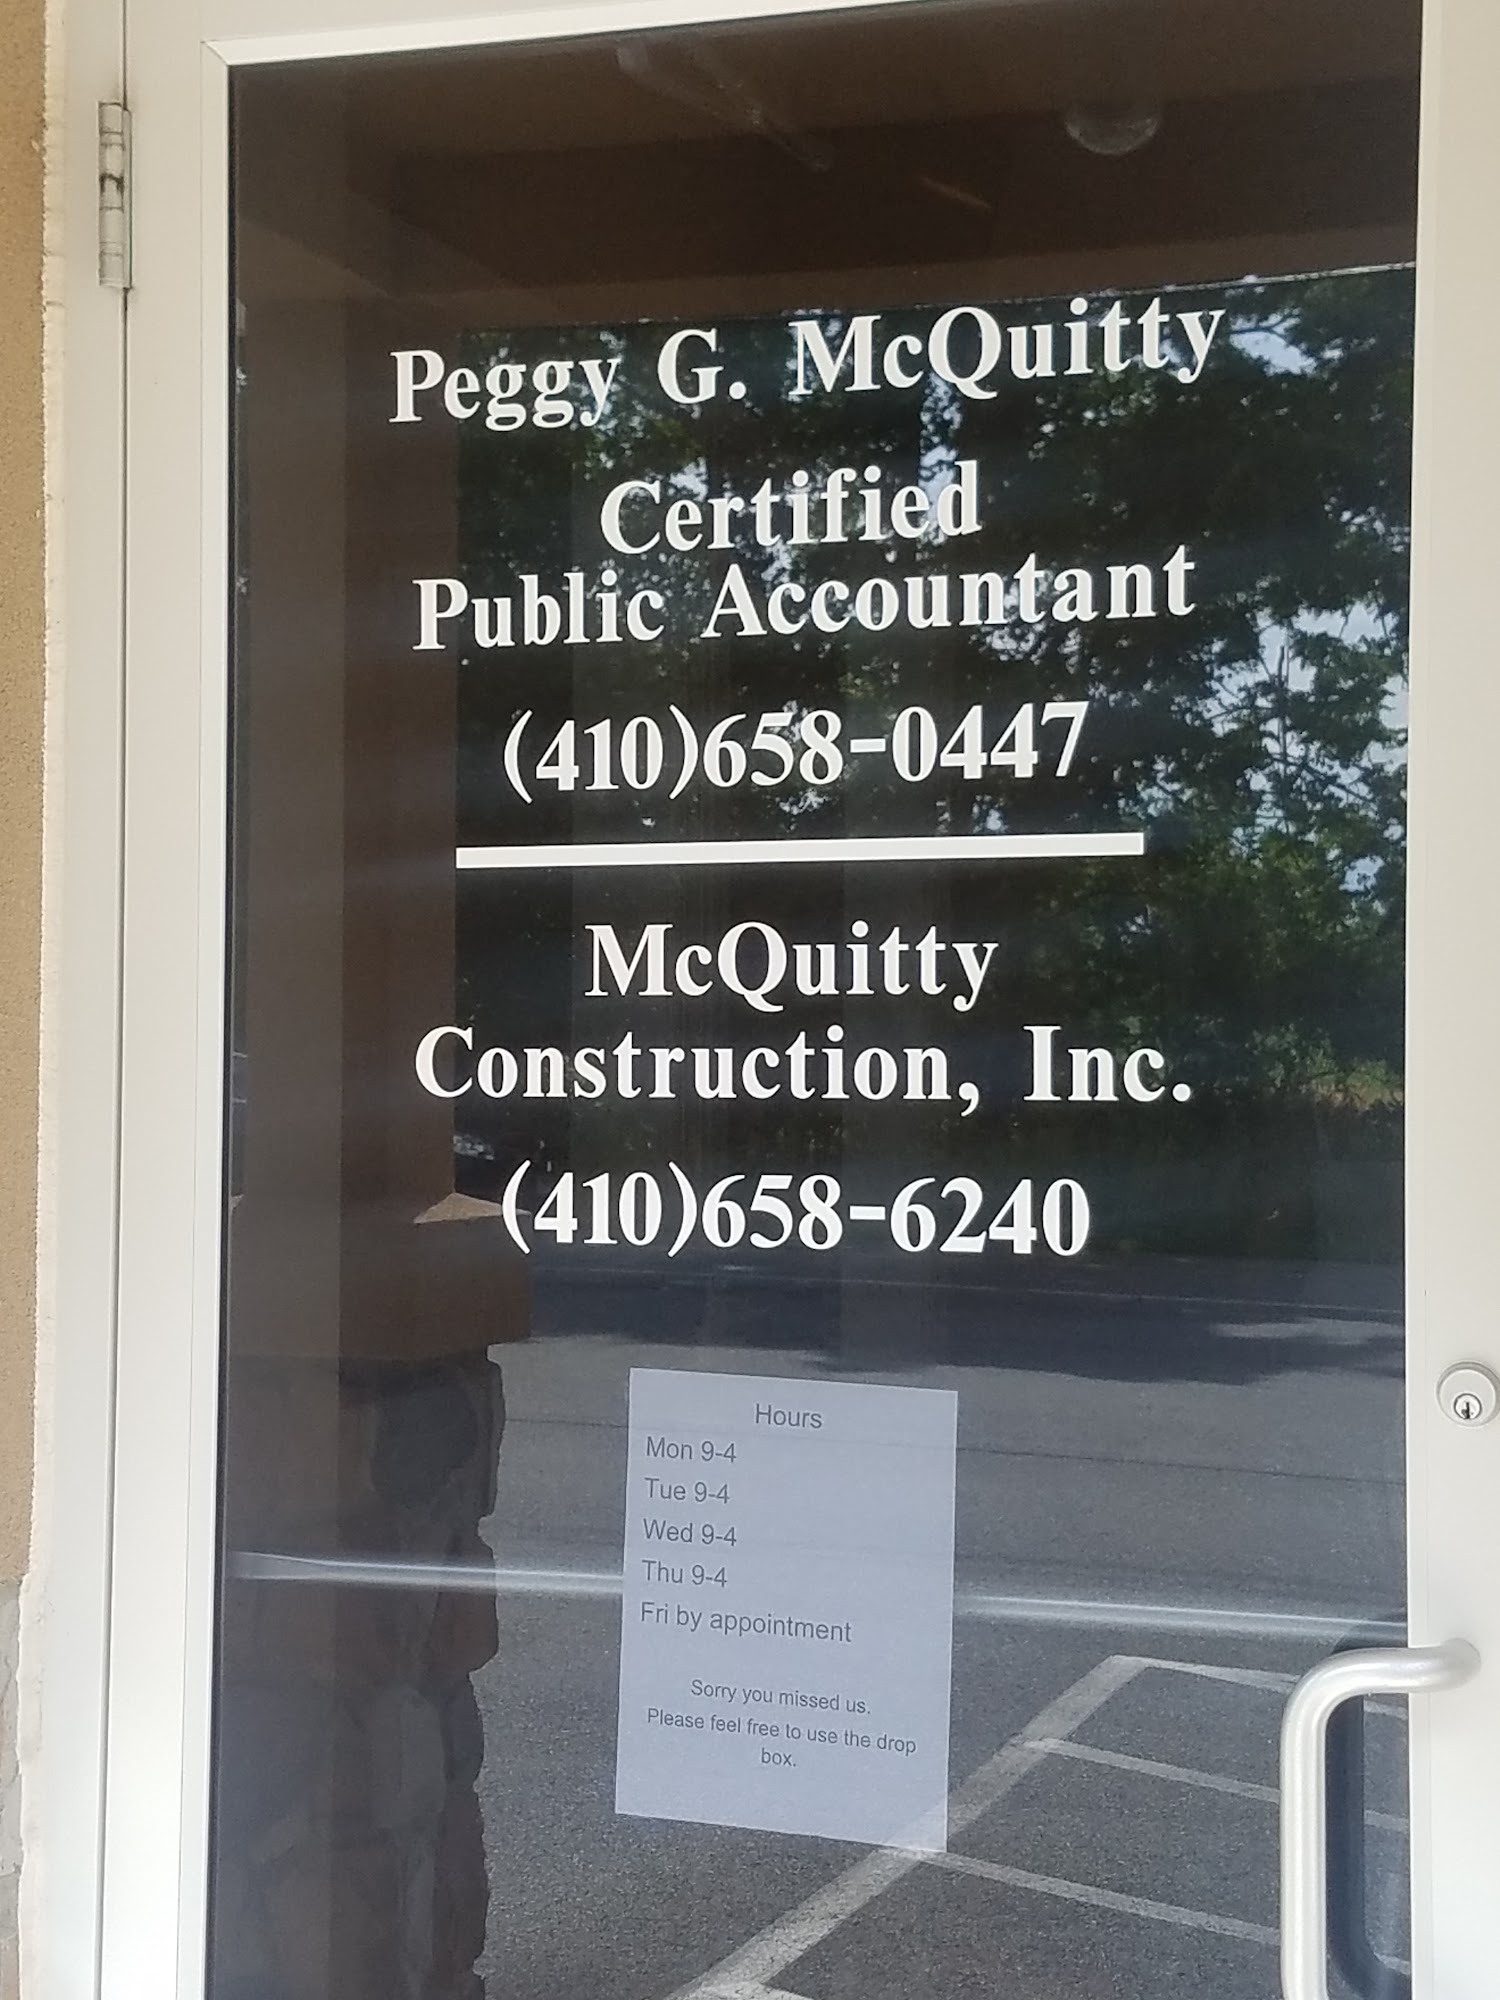 Foucault & Associates. 320 Old Zion Rd, North East Maryland 21901